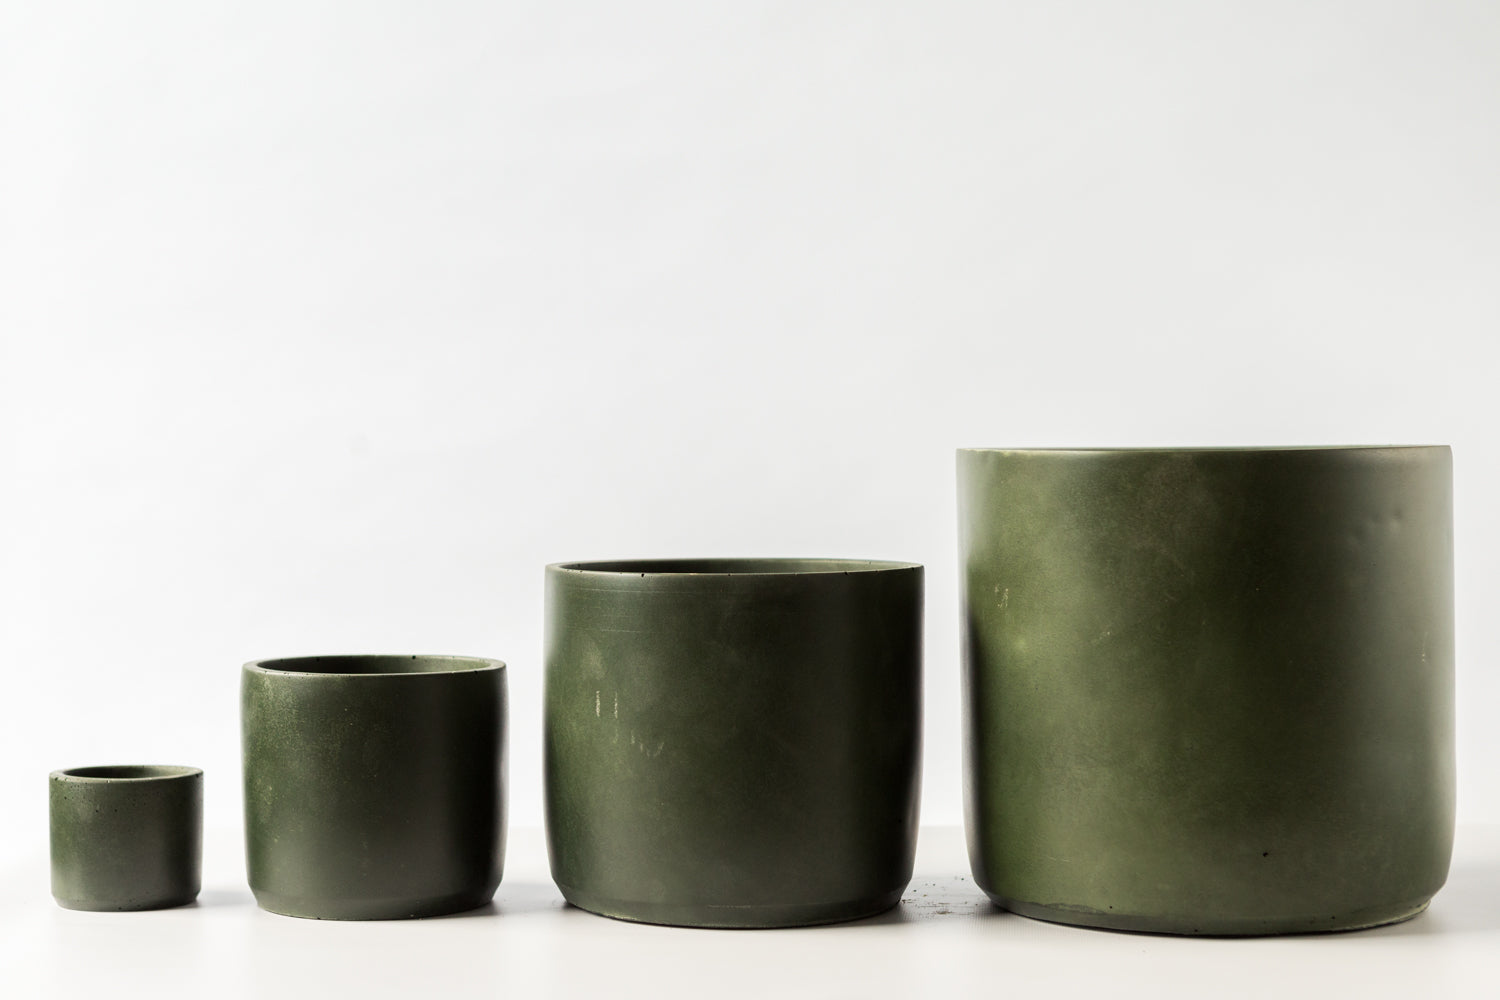 Dark Olive Green Plant Pot hand-made by Concrete Jungle in sizes small through to extra large